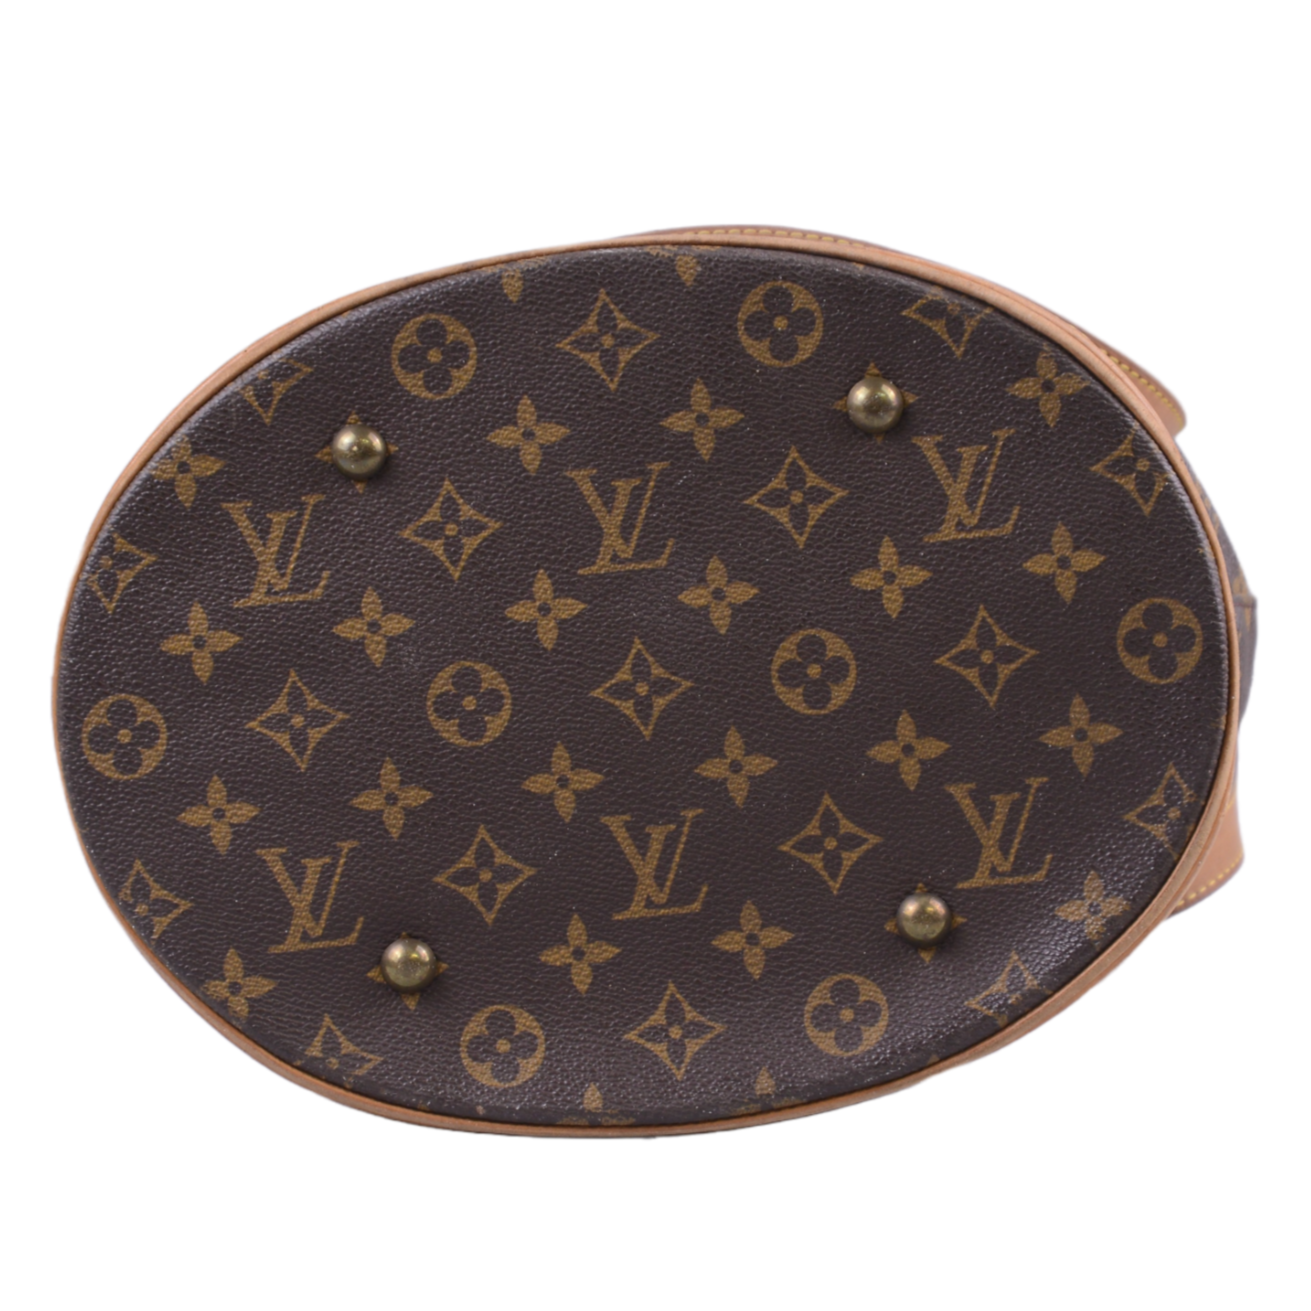 Louis Vuitton Bucket GM Monogram Tote Bag With Pouch